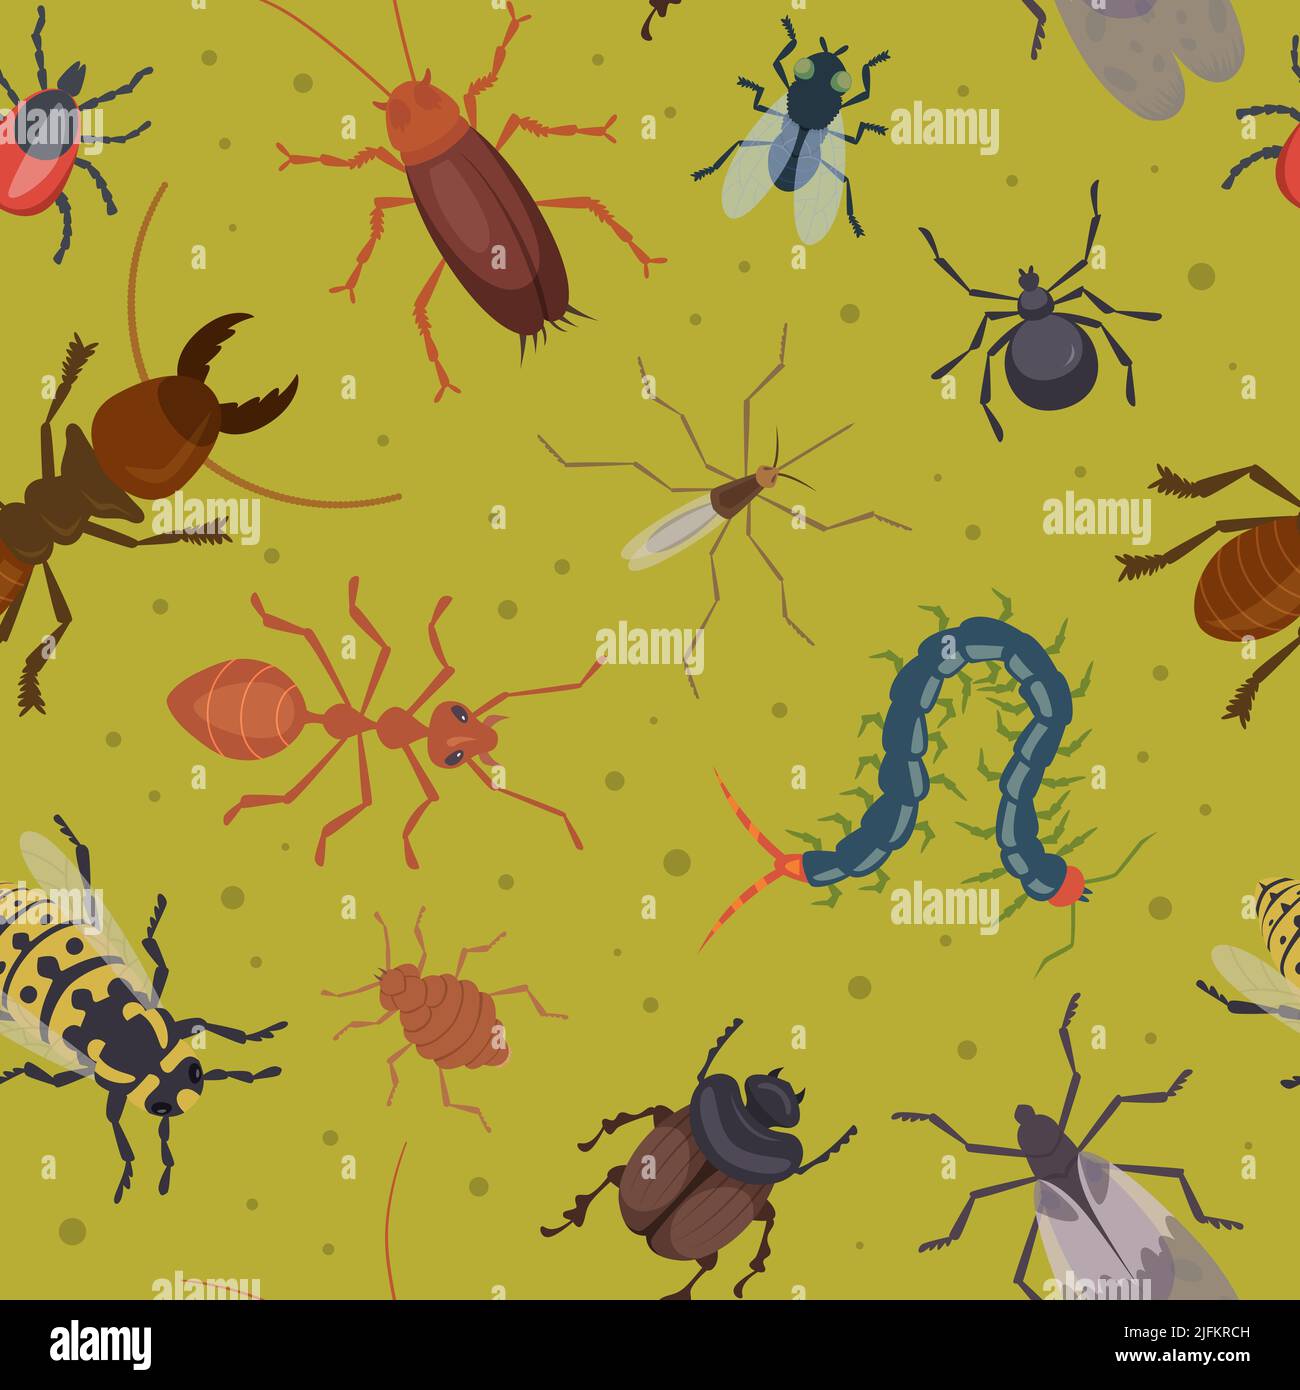 Insects pattern. Ants flea roaches harmful bugs illustrations for textile design project exact vector seamless background Stock Vector